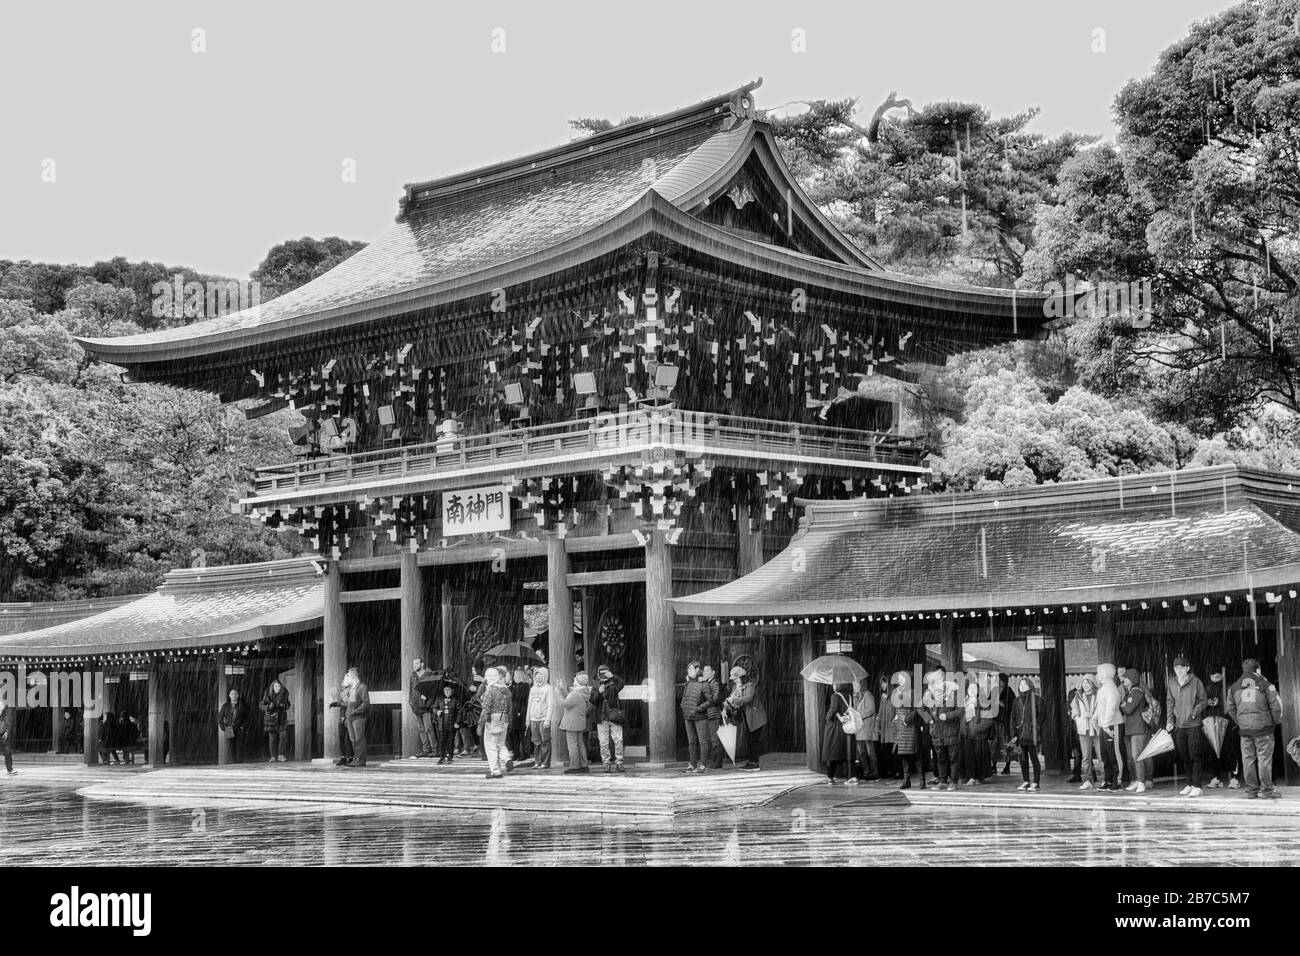 Tokyo, Japan - 31 December 2020: Buiddhist temple complex Meiji-jingu in the middle of green park. Entry gate around inner yard at rain with tourists Stock Photo